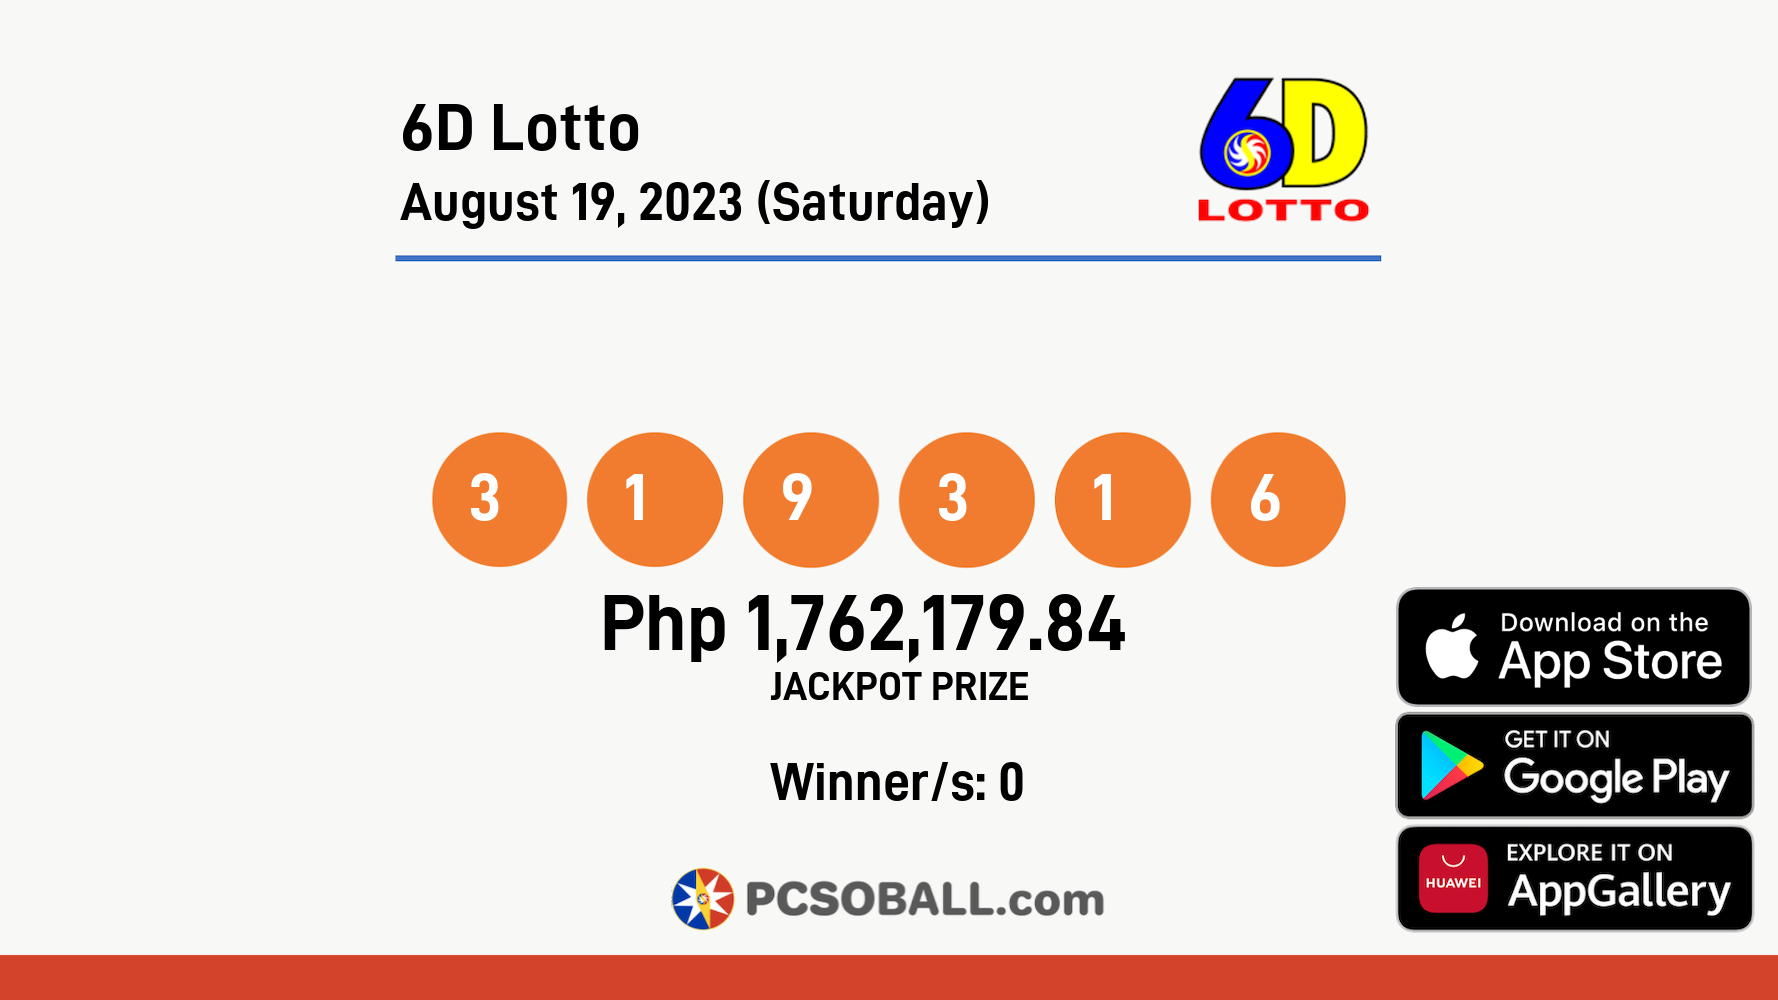 6D Lotto August 19, 2023 (Saturday) Result